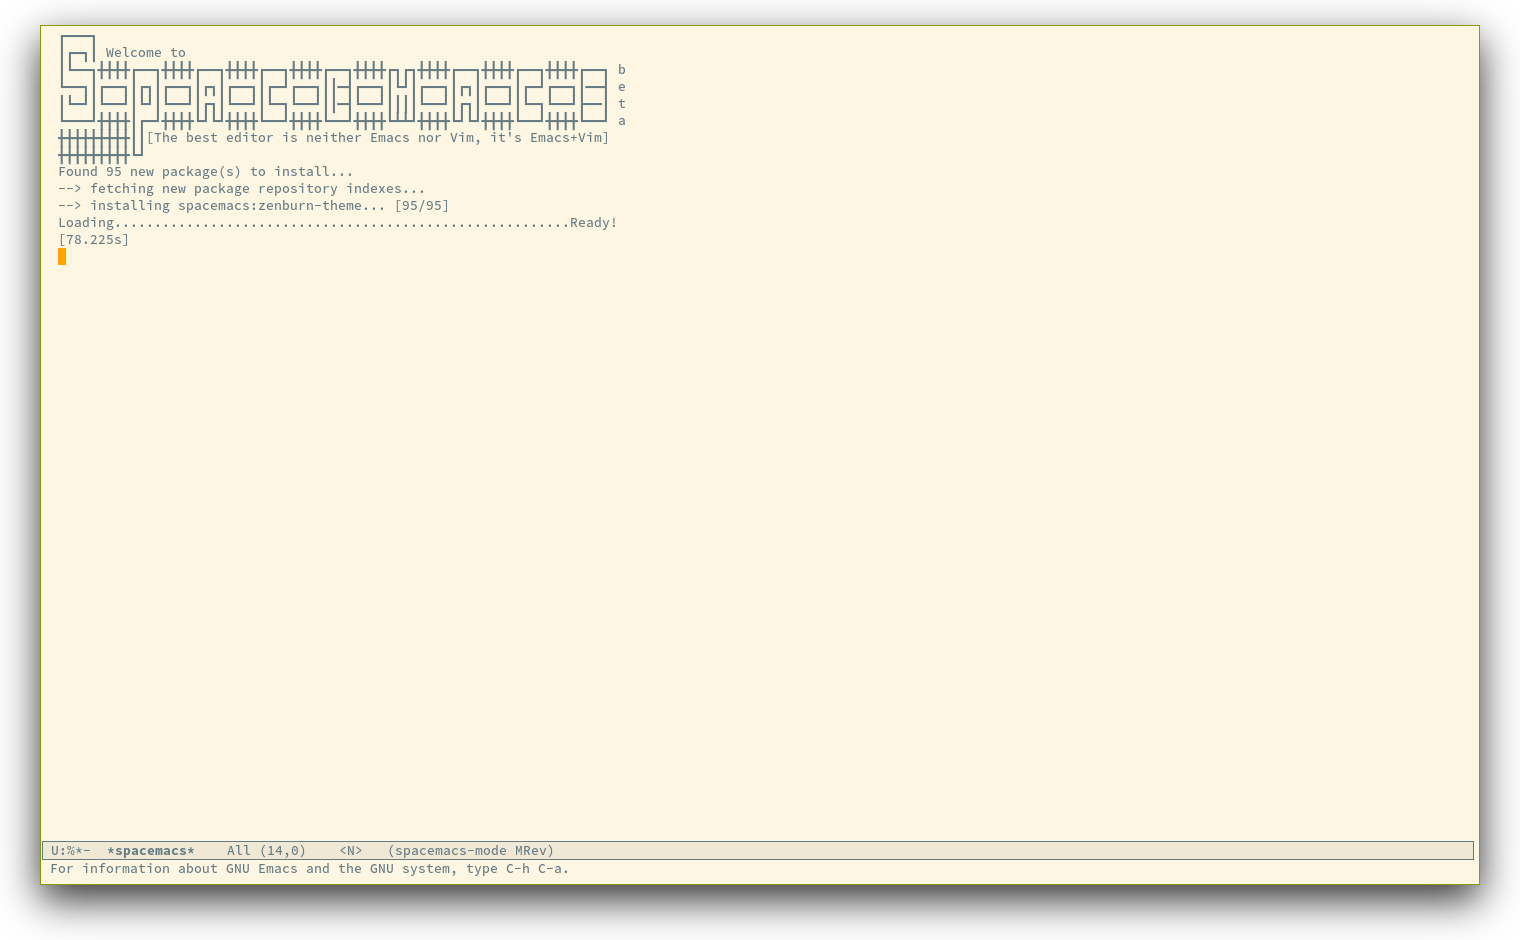 /TakeV/spacemacs/media/commit/fd95f9090f3c6ca303fa60c5b486ba6a7202f202/doc/img/spacemacs-startup.png